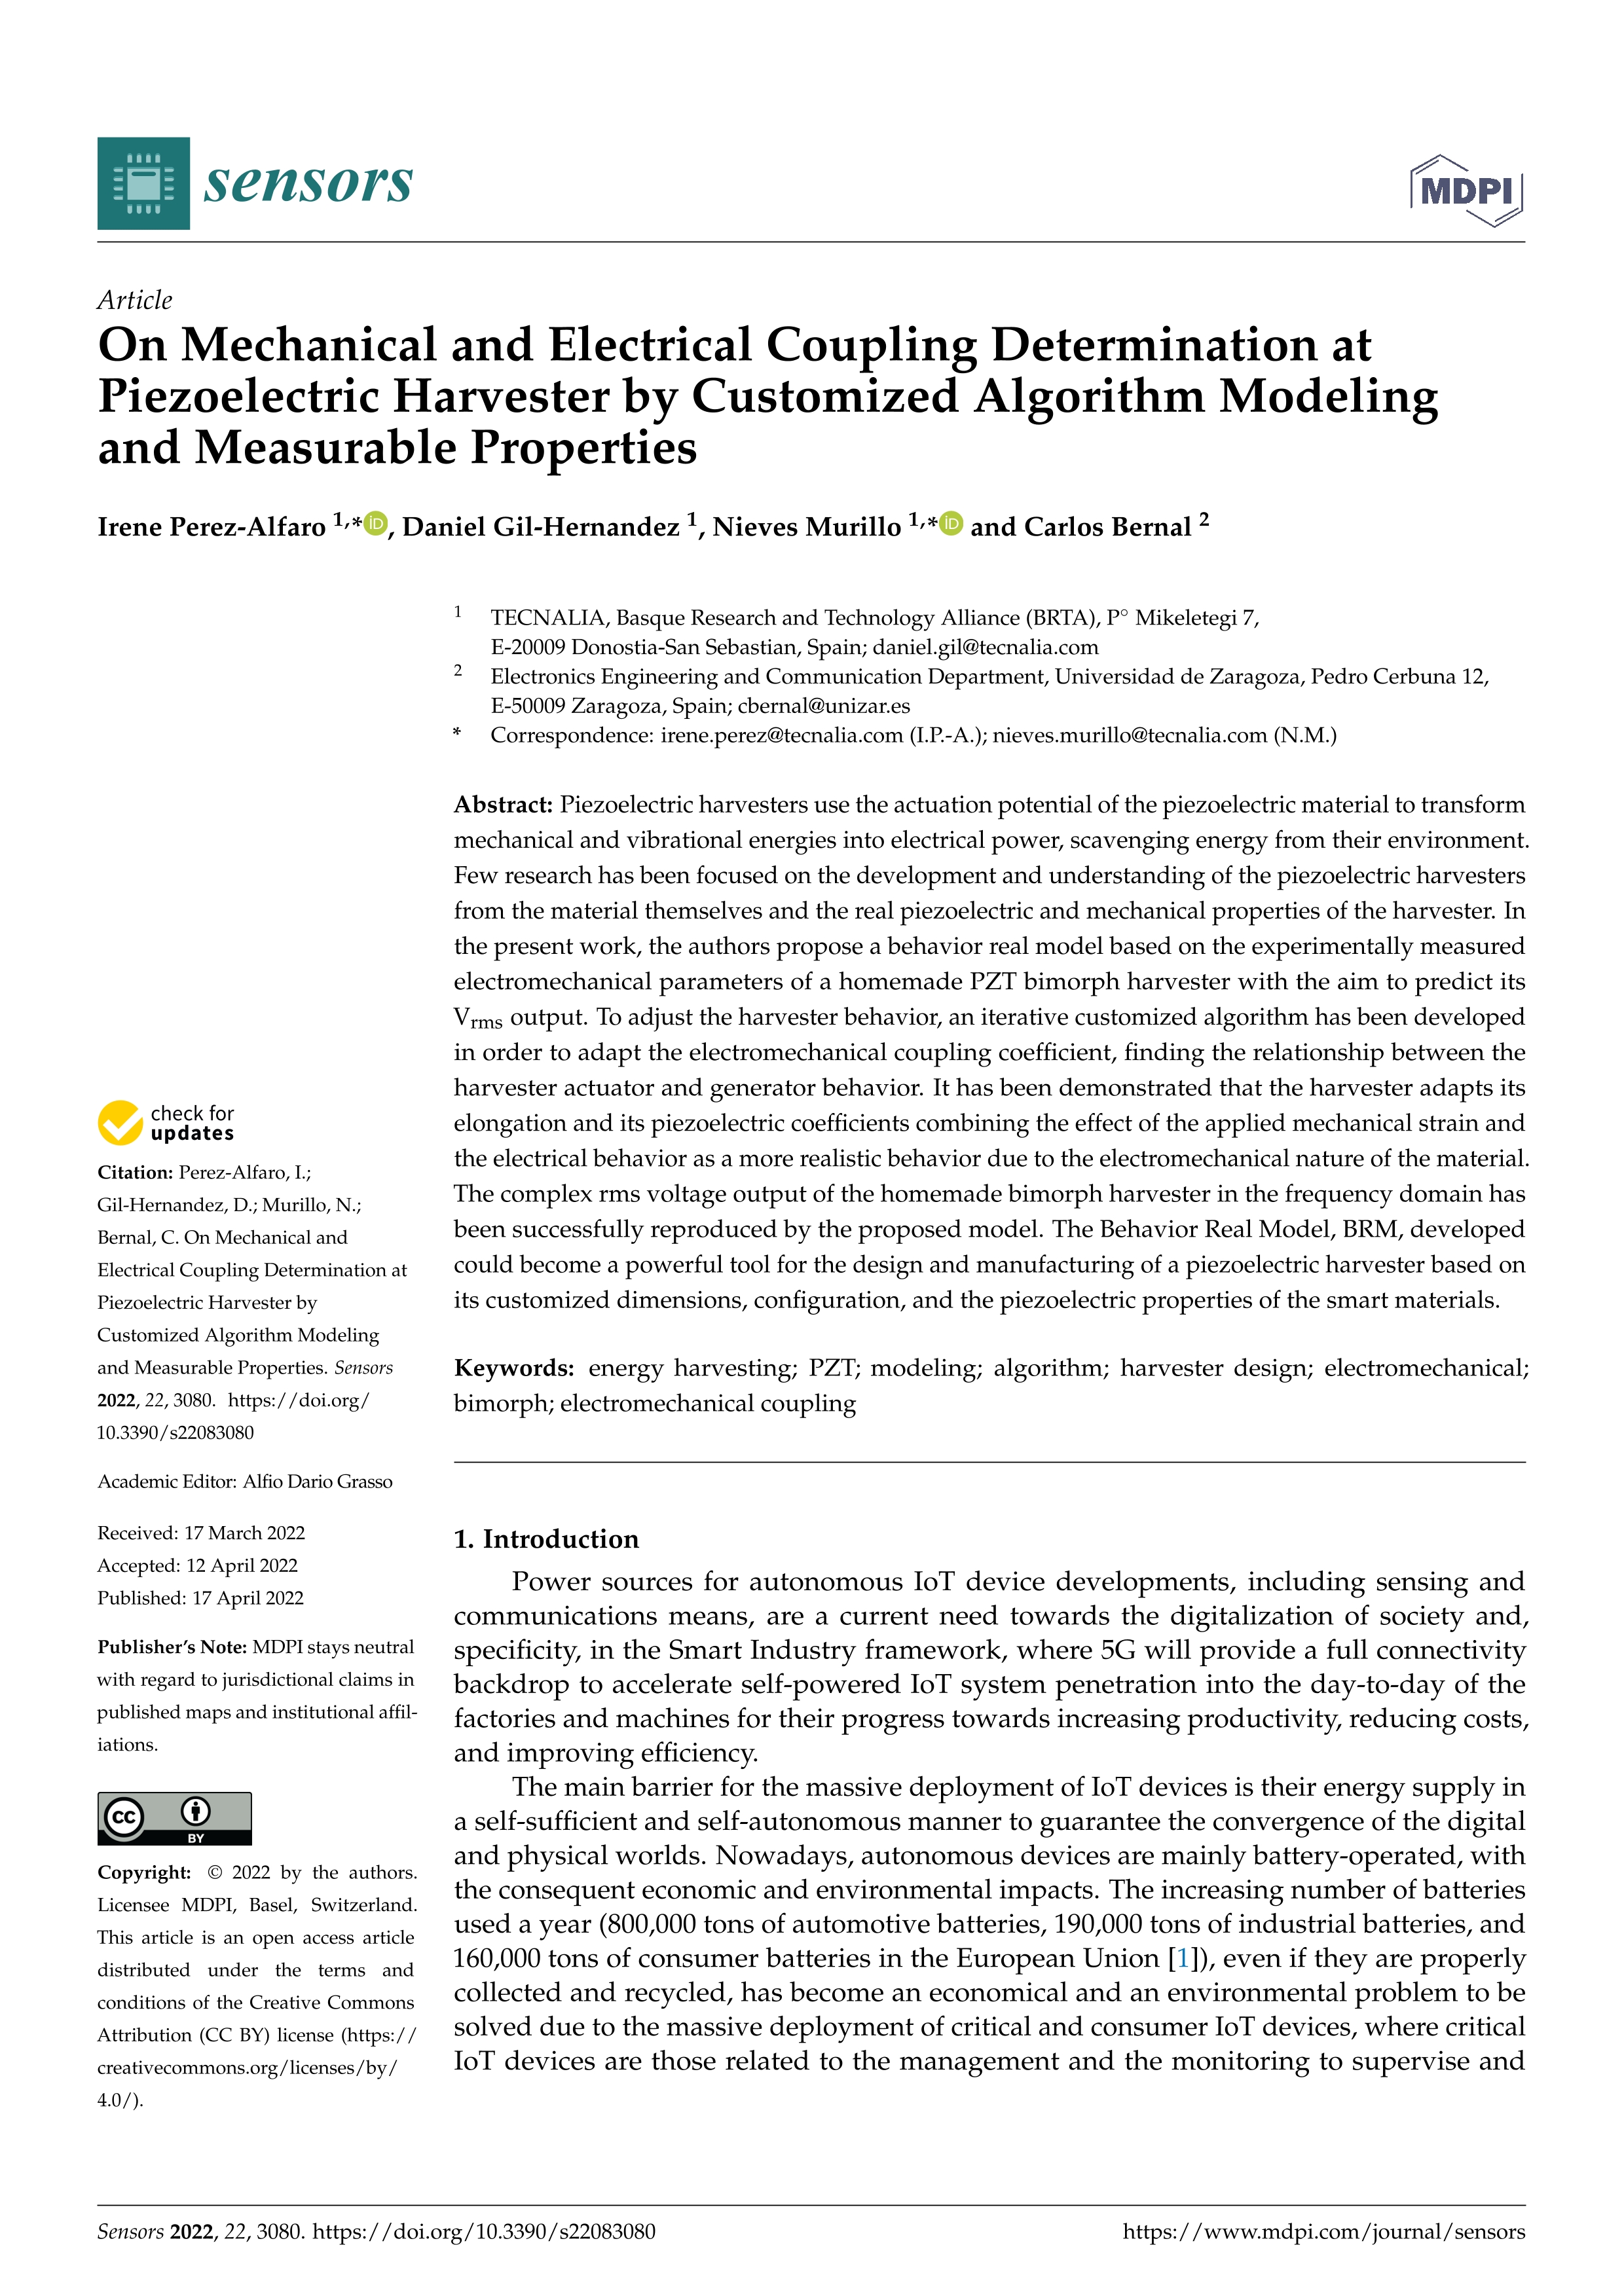 On Mechanical and Electrical Coupling Determination at Piezoelectric Harvester by Customized Algorithm Modeling and Measurable Properties